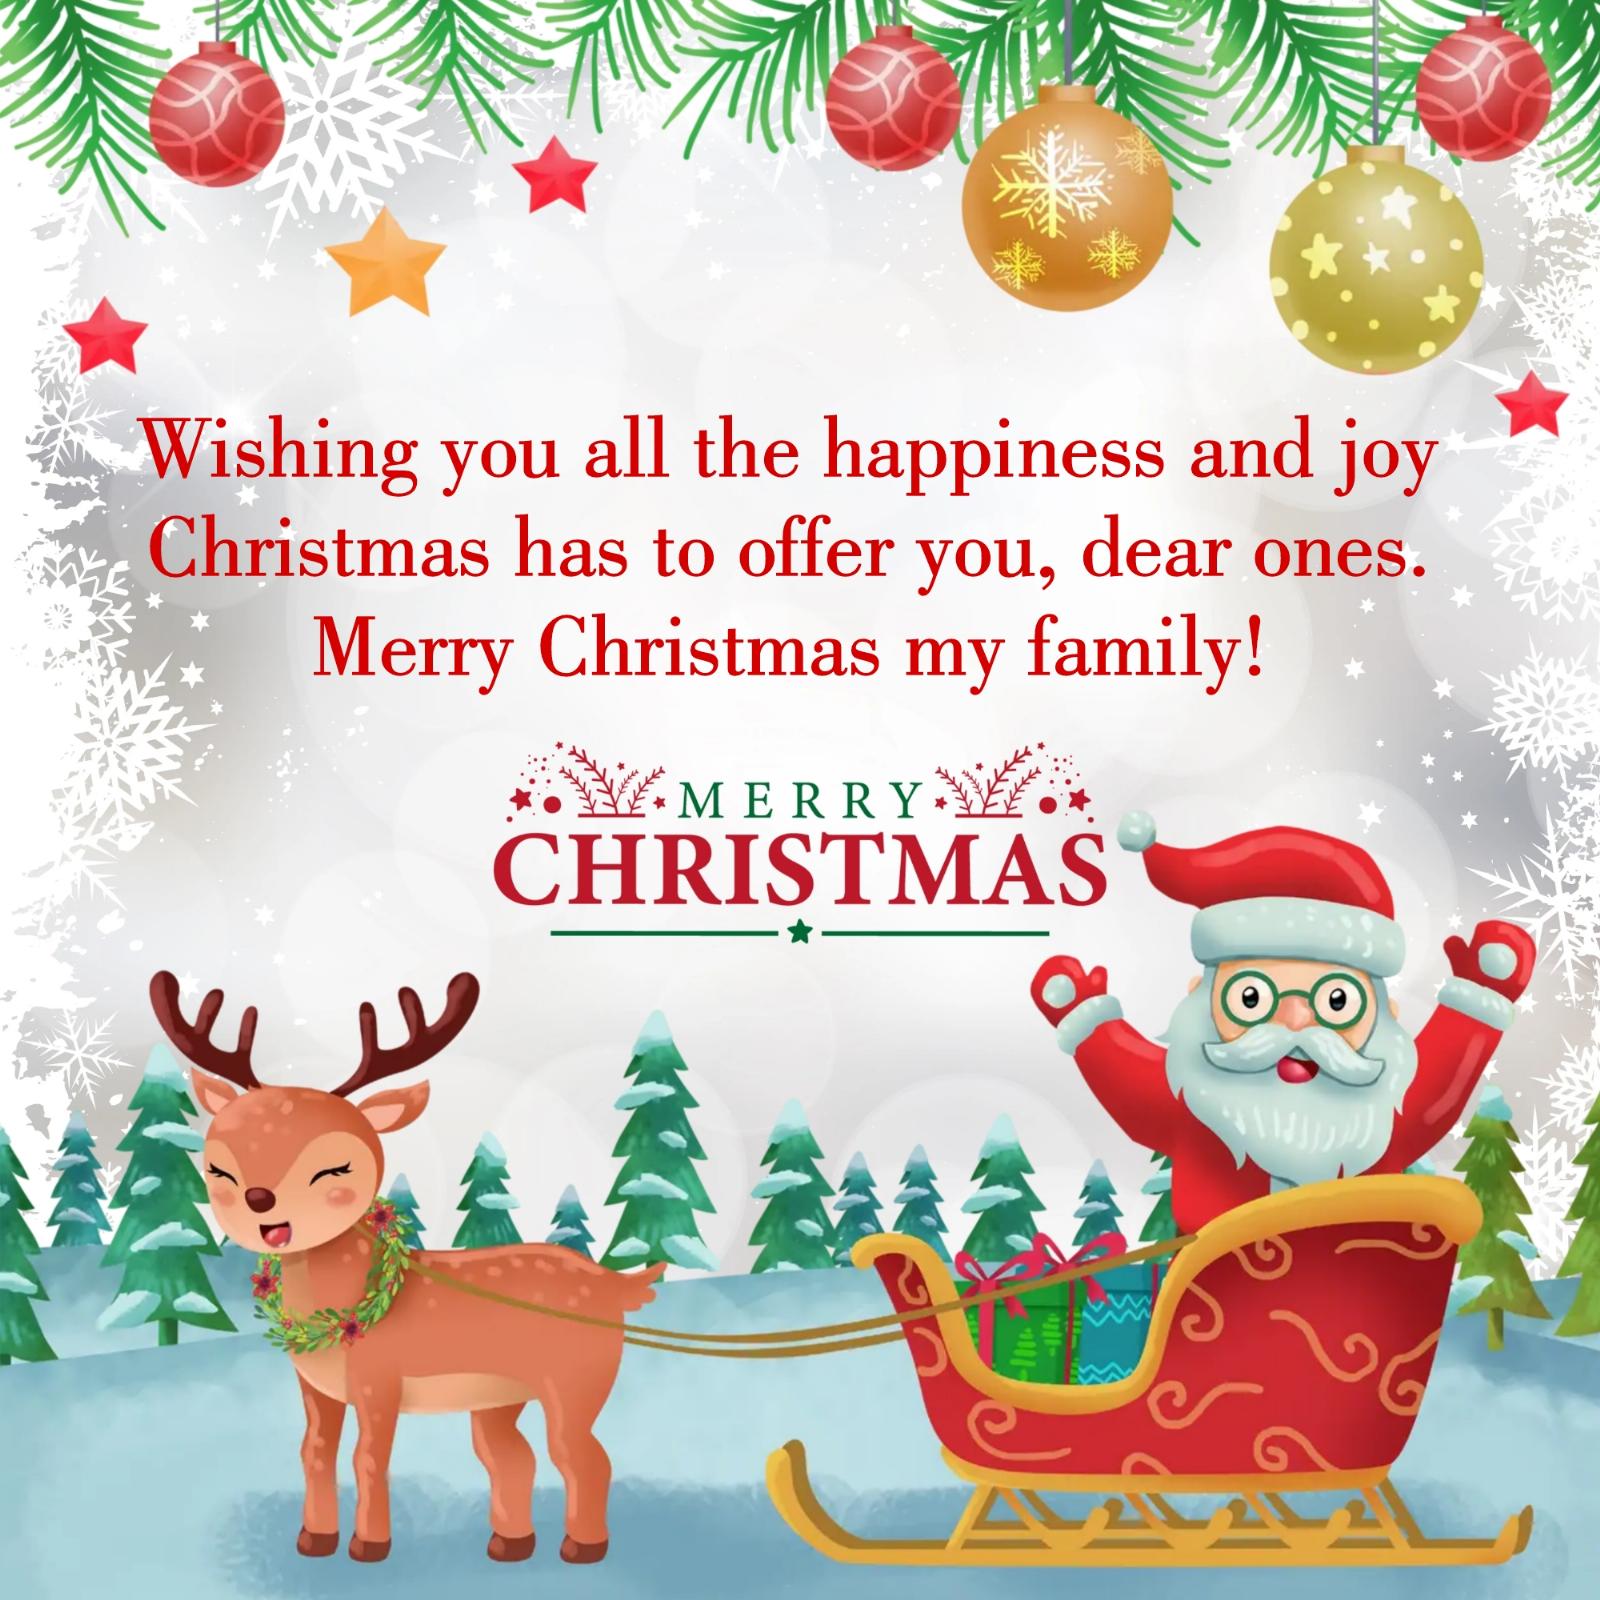 Wishing you all the happiness and joy Christmas has to offer